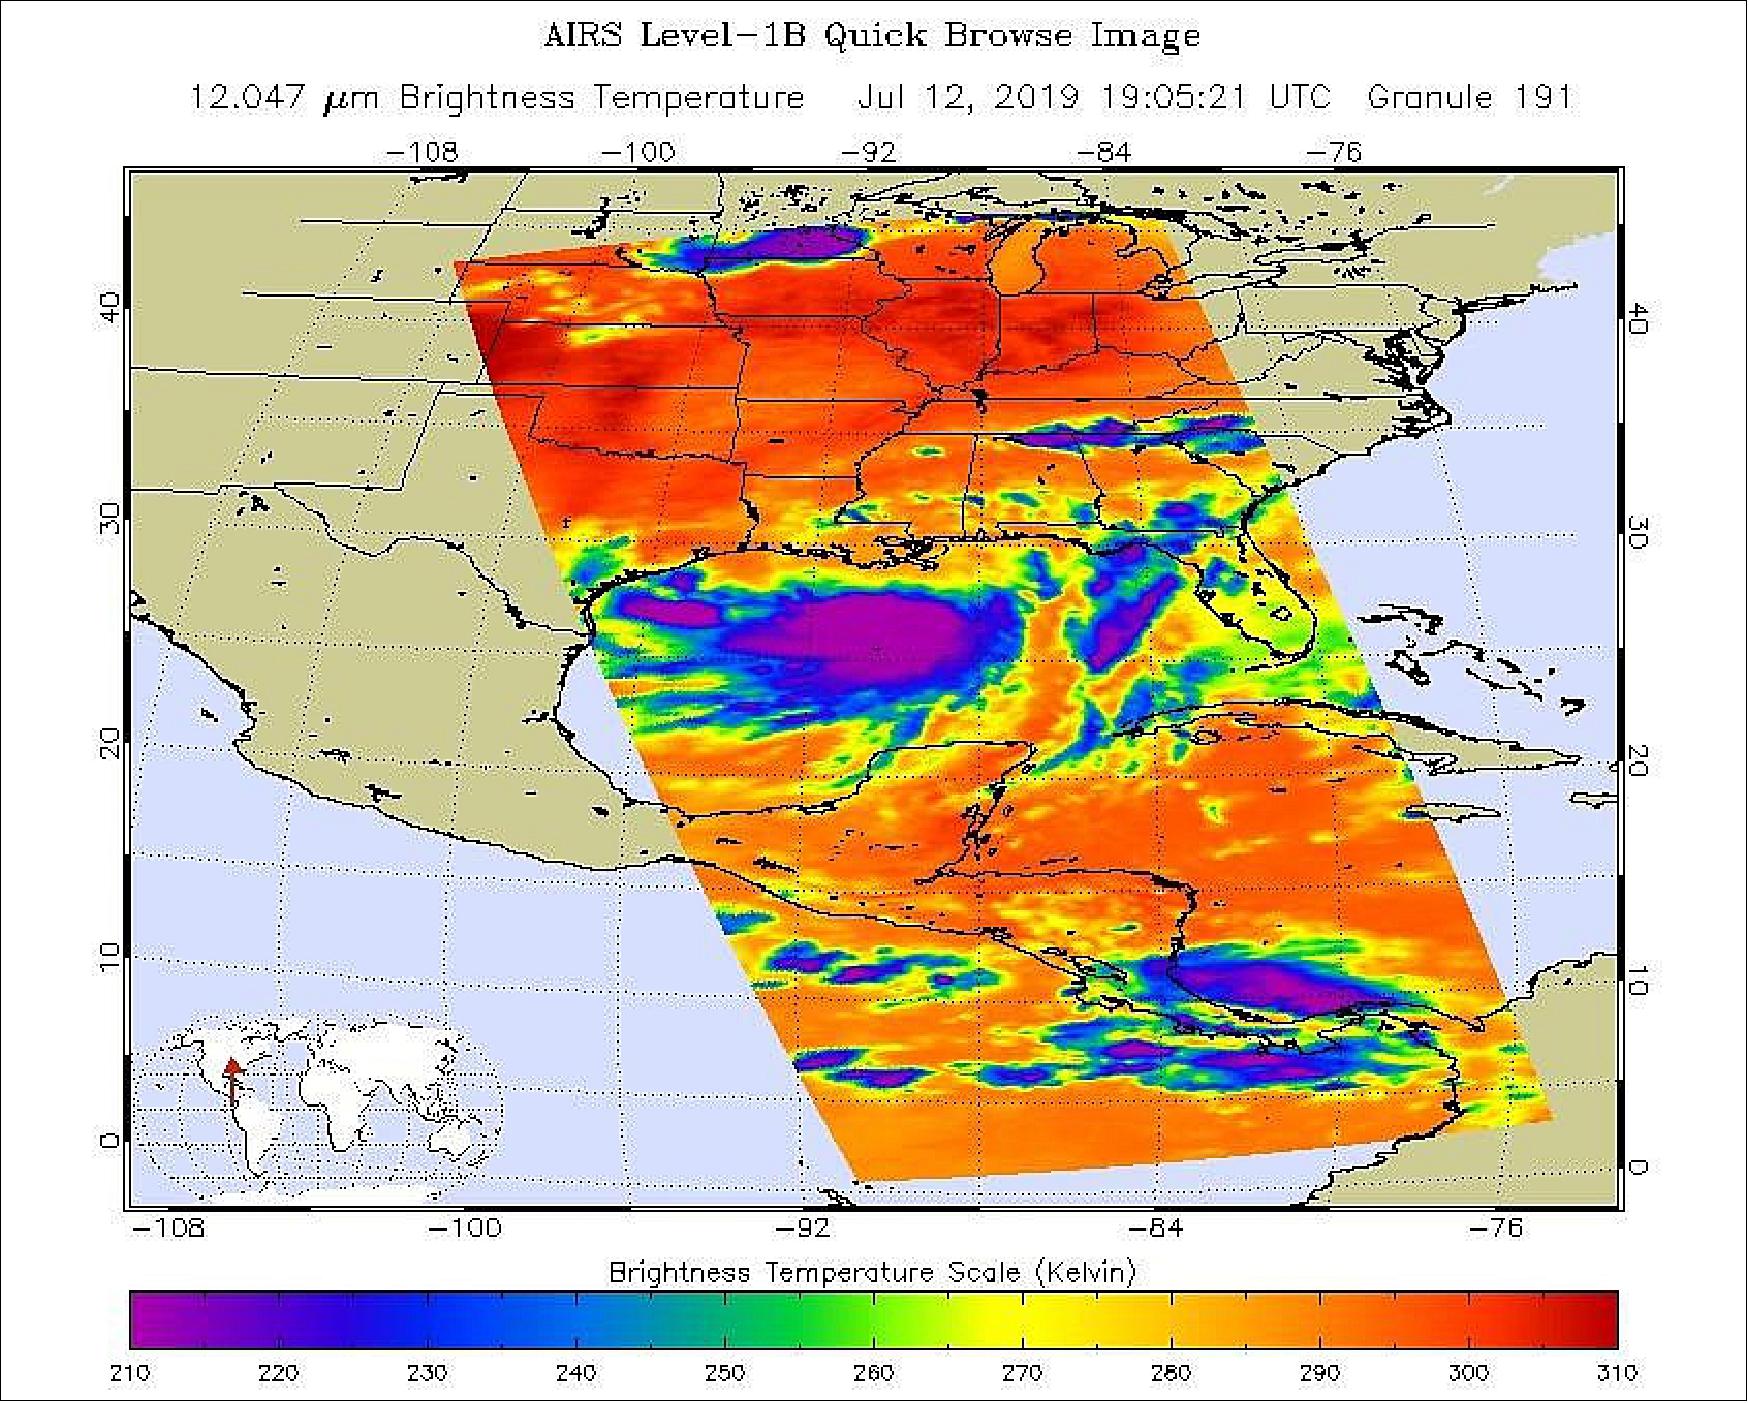 Figure 25: NASA's AIRS instrument imaged Tropical Storm Barry on the afternoon of July 12, 2019, a day before the storm is expected to make landfall on the Louisiana Coast. The infrared image shows very cold clouds that have been carried high into the atmosphere by deep thunderstorms in purple. These clouds are associated with heavy rainfall. Warmer areas with shallower rain clouds are shown in blue and green. And the orange and red areas represent mostly cloud-free air (image credit: NASA/JPL-Caltech)